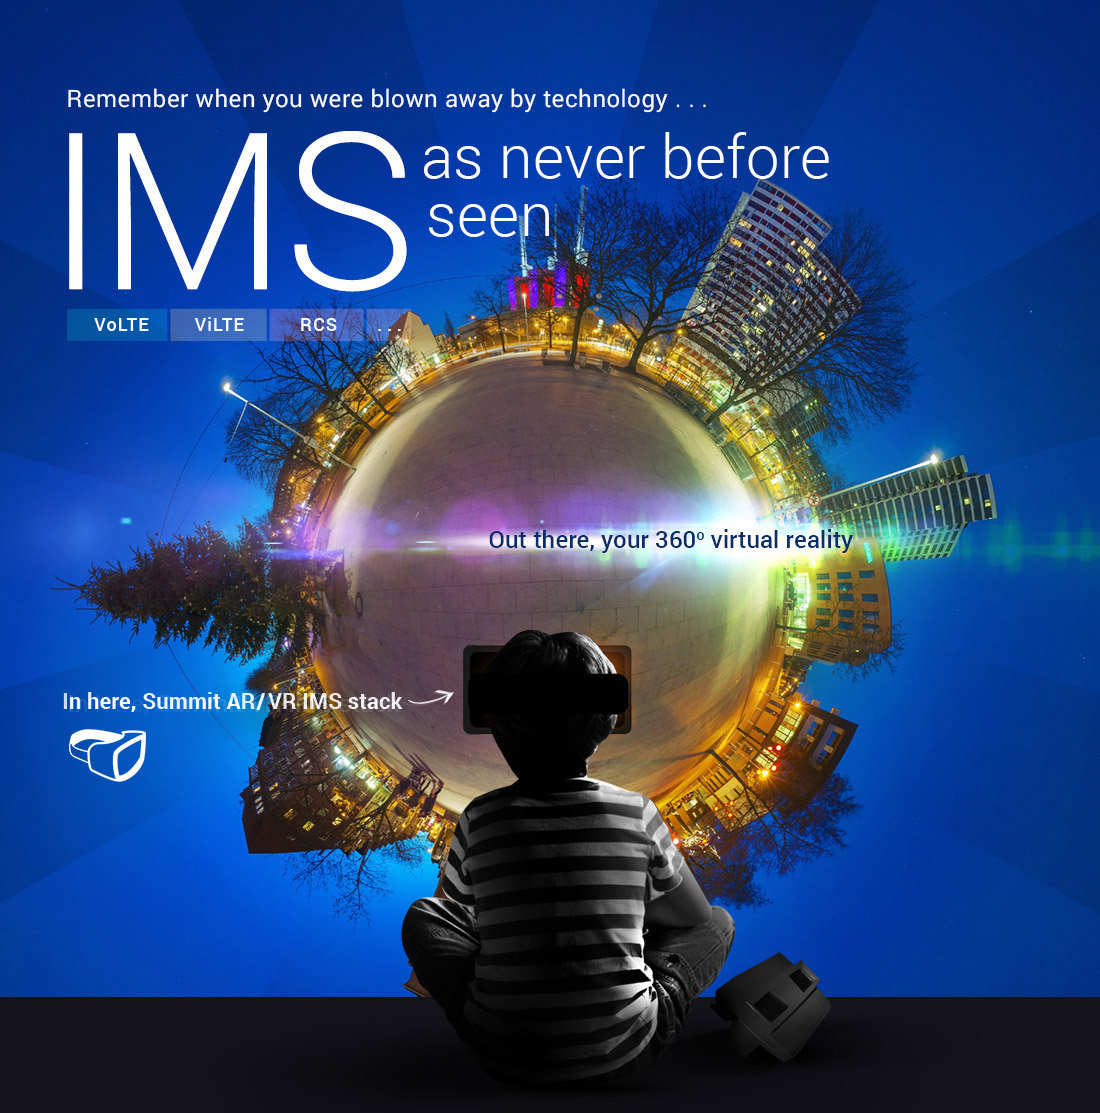 Remember when you were blown away by technology... IMS as never before seen. Out there you 360 degree virtual reality - In here, Summit VR IMS stack